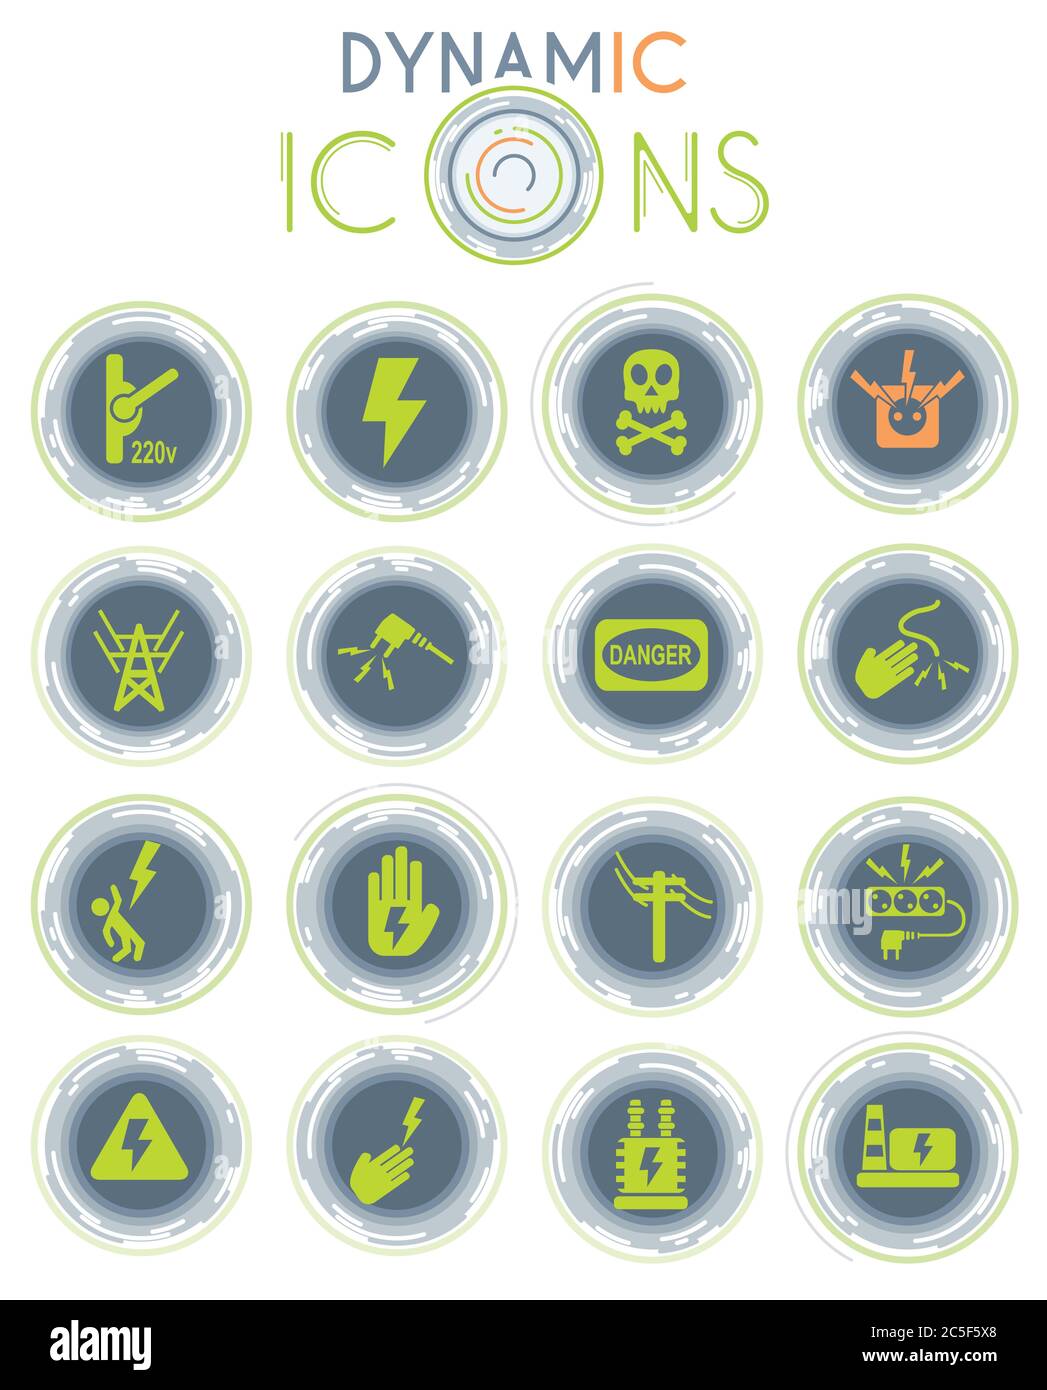 high voltage dynamic icons Stock Vector